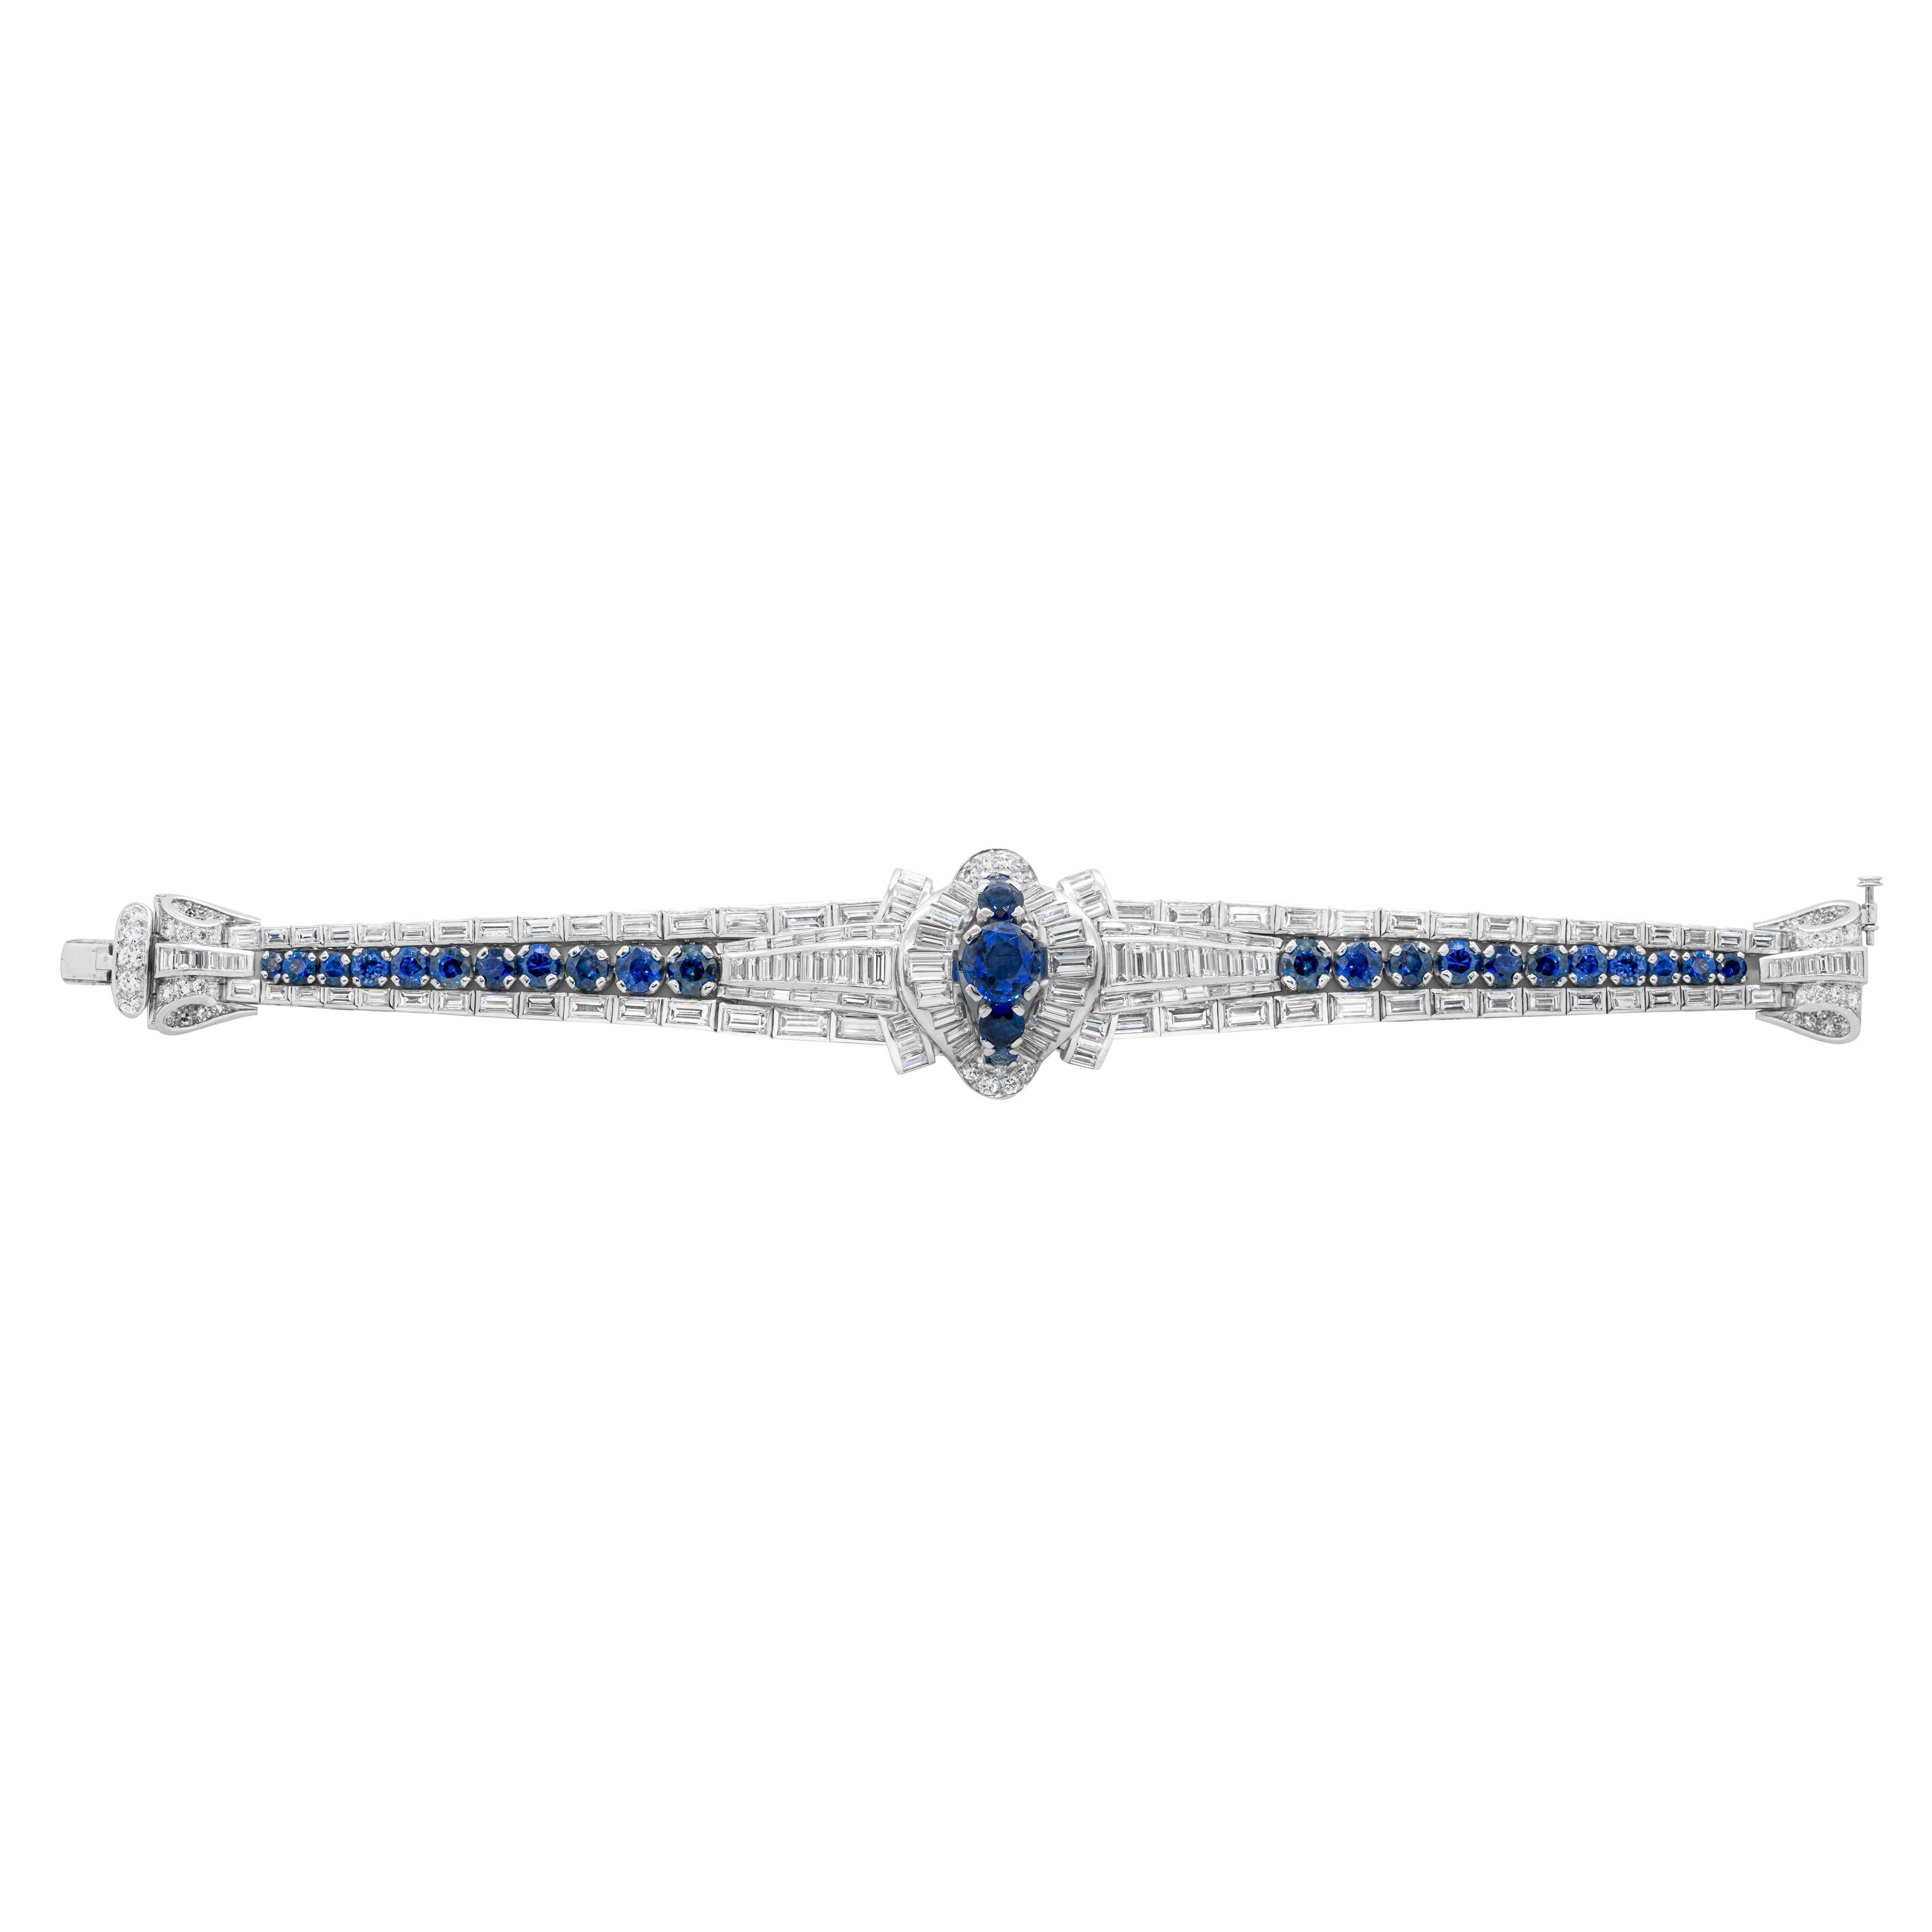 Dating back to the 1950's, this magnificent handmade bracelet features a large royal blue sapphire in the centre, weighing approximately 3.10 carats, set in-between two smaller sapphires inside a halo of channel set diamonds. The bracelet is further